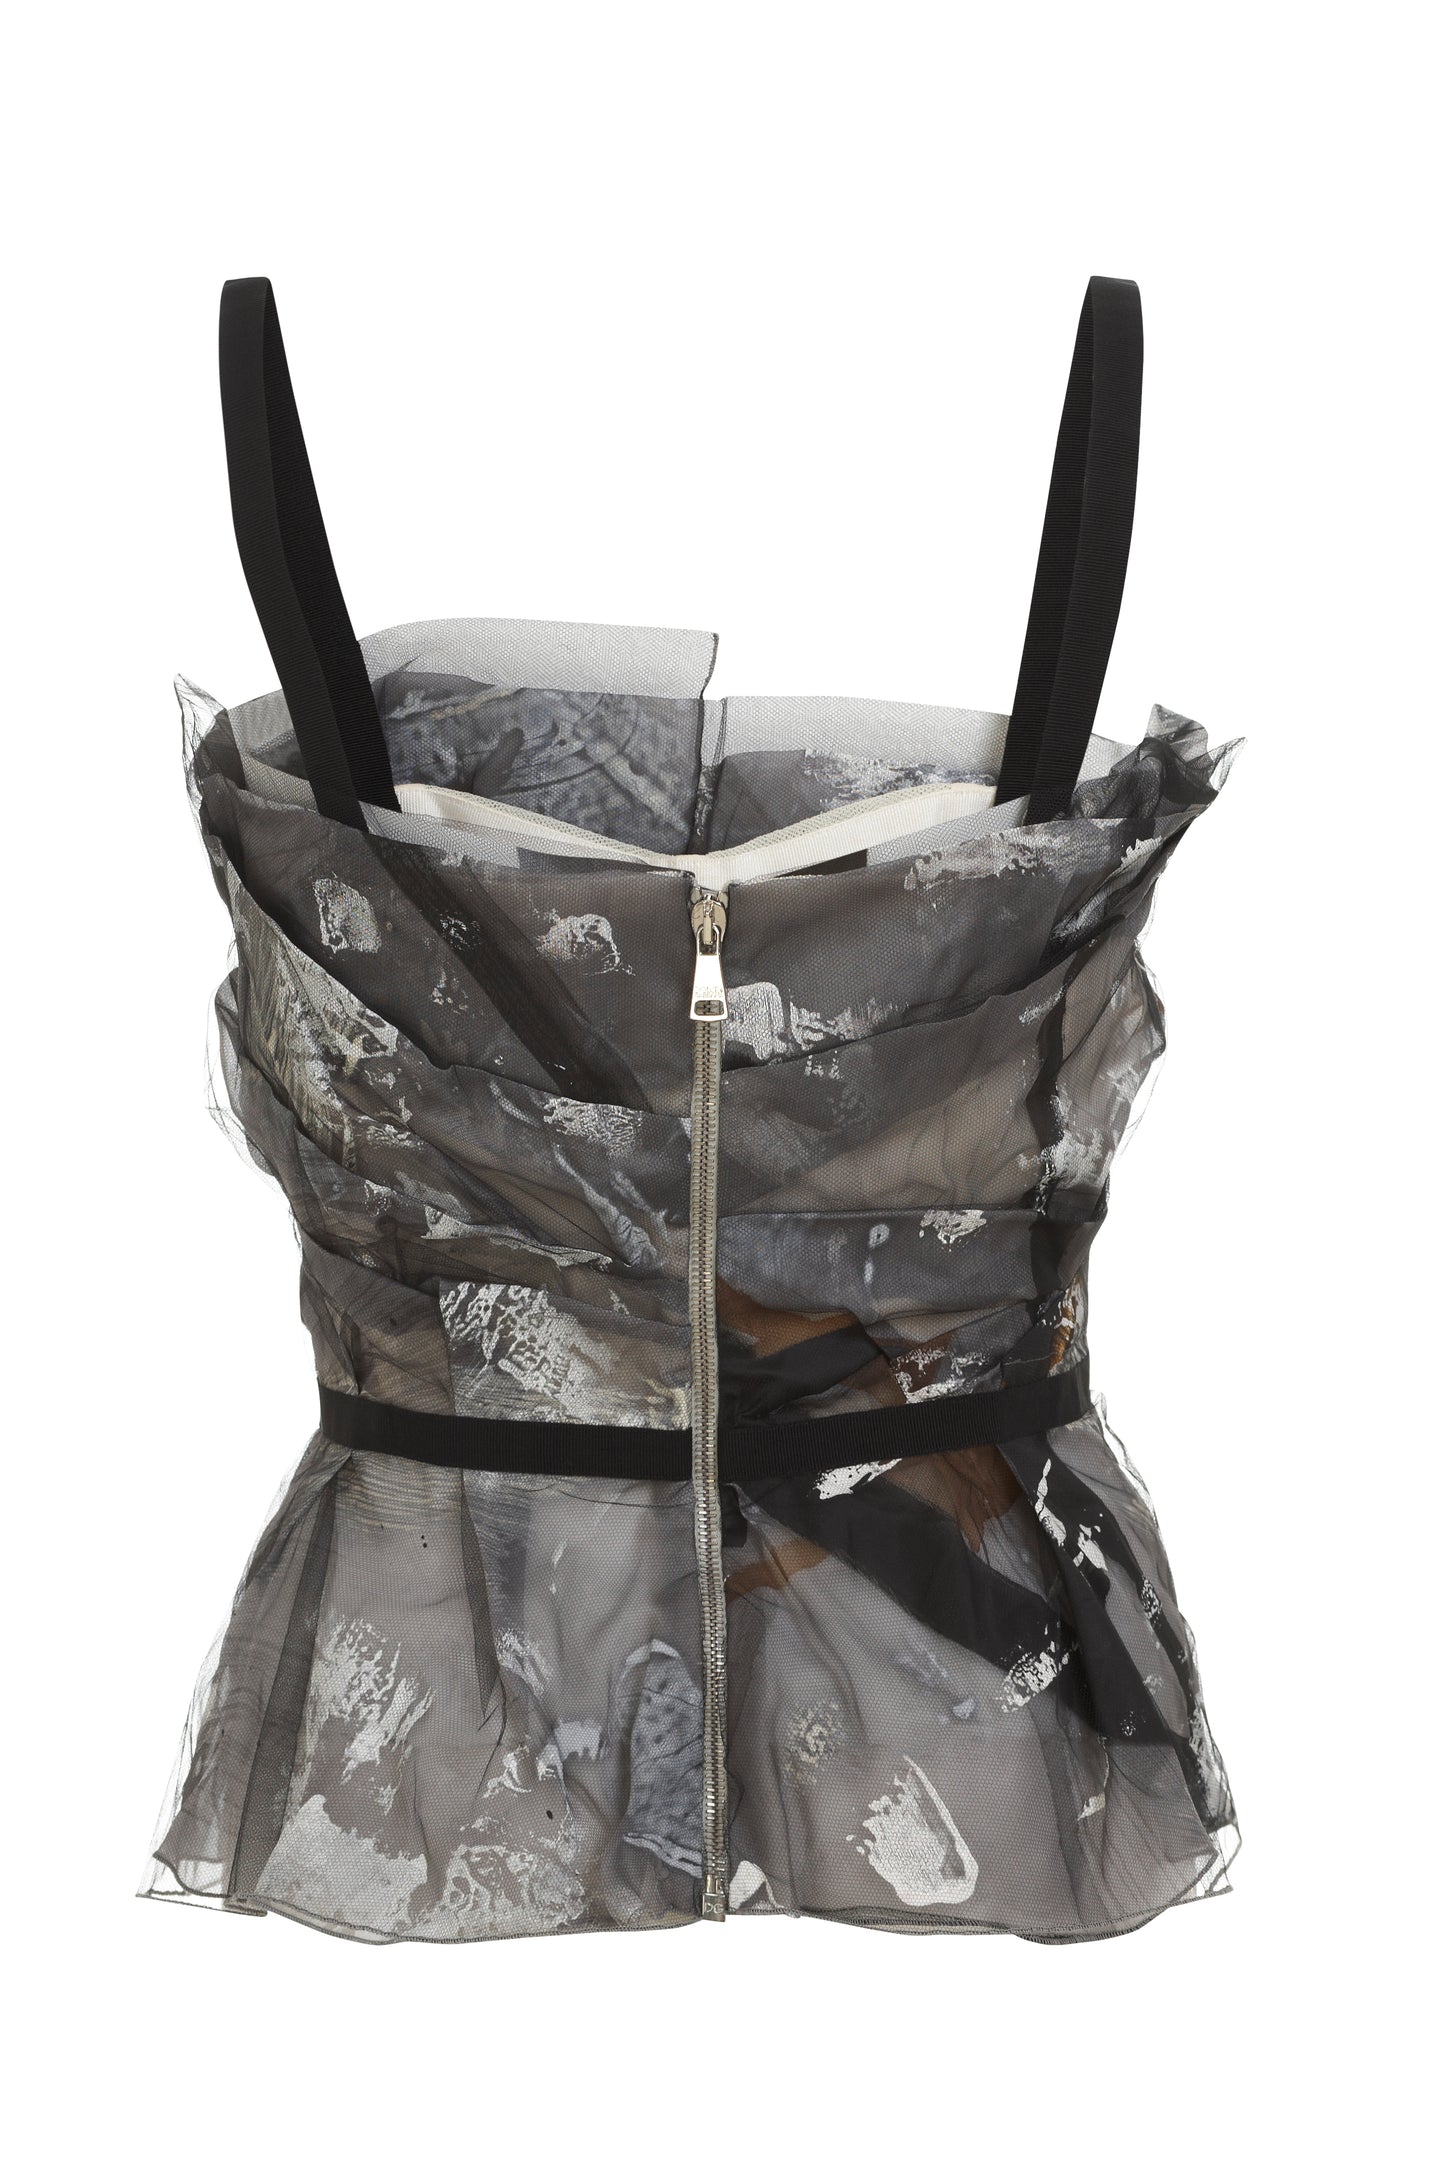 Dolce & Gabbana limited edition grey bustier style top